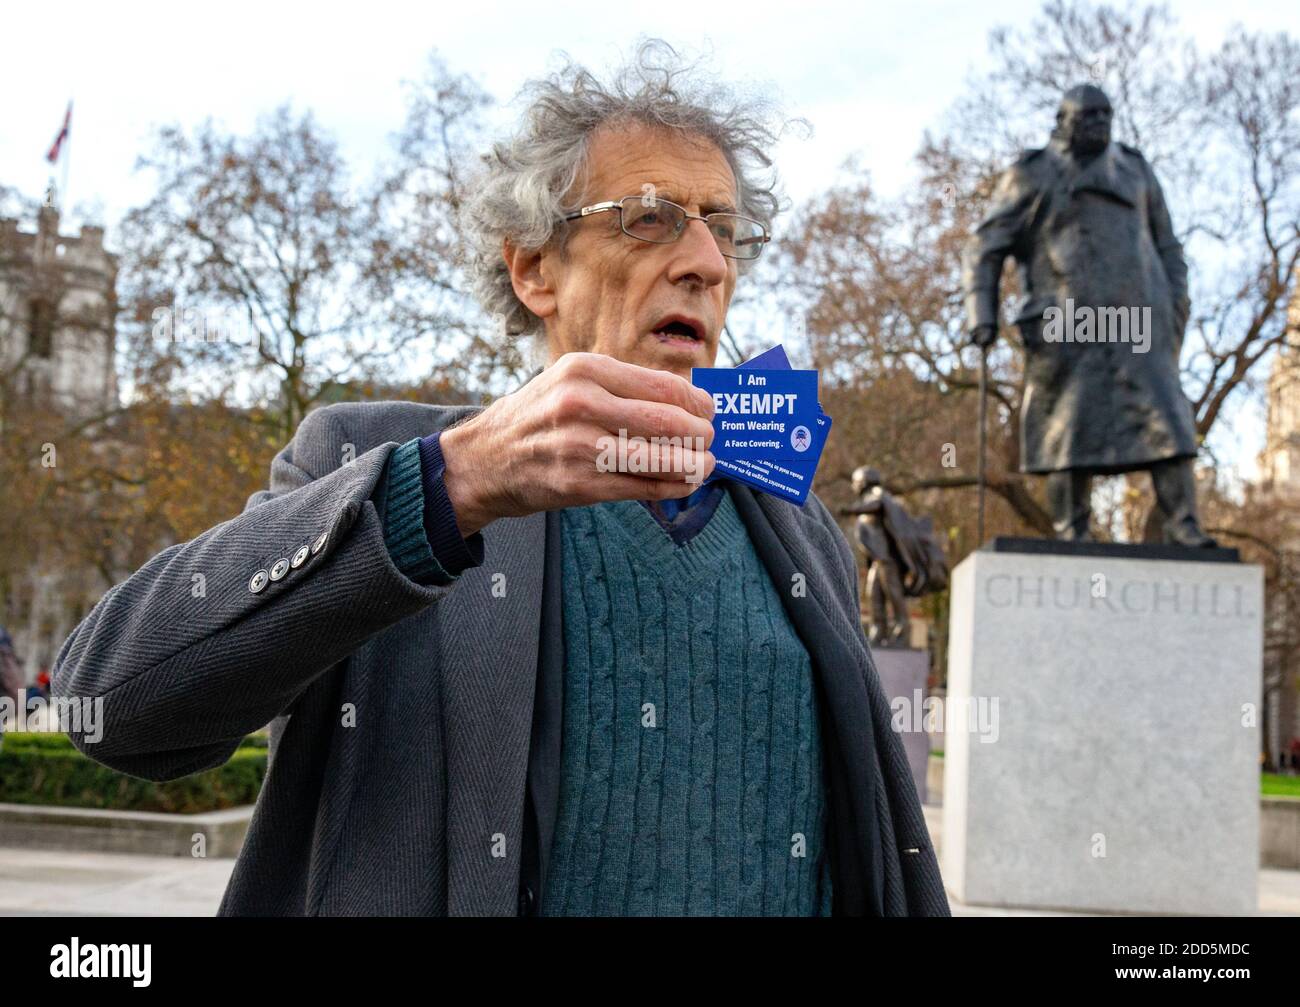 London, UK. 24th Nov, 2020. Piers Corbyn shows a facemask exemption card. Anti Vaccine protest. Piers Corbyn and other anti-vaccine protesters in Westminster. Credit: Mark Thomas/Alamy Live News Stock Photo